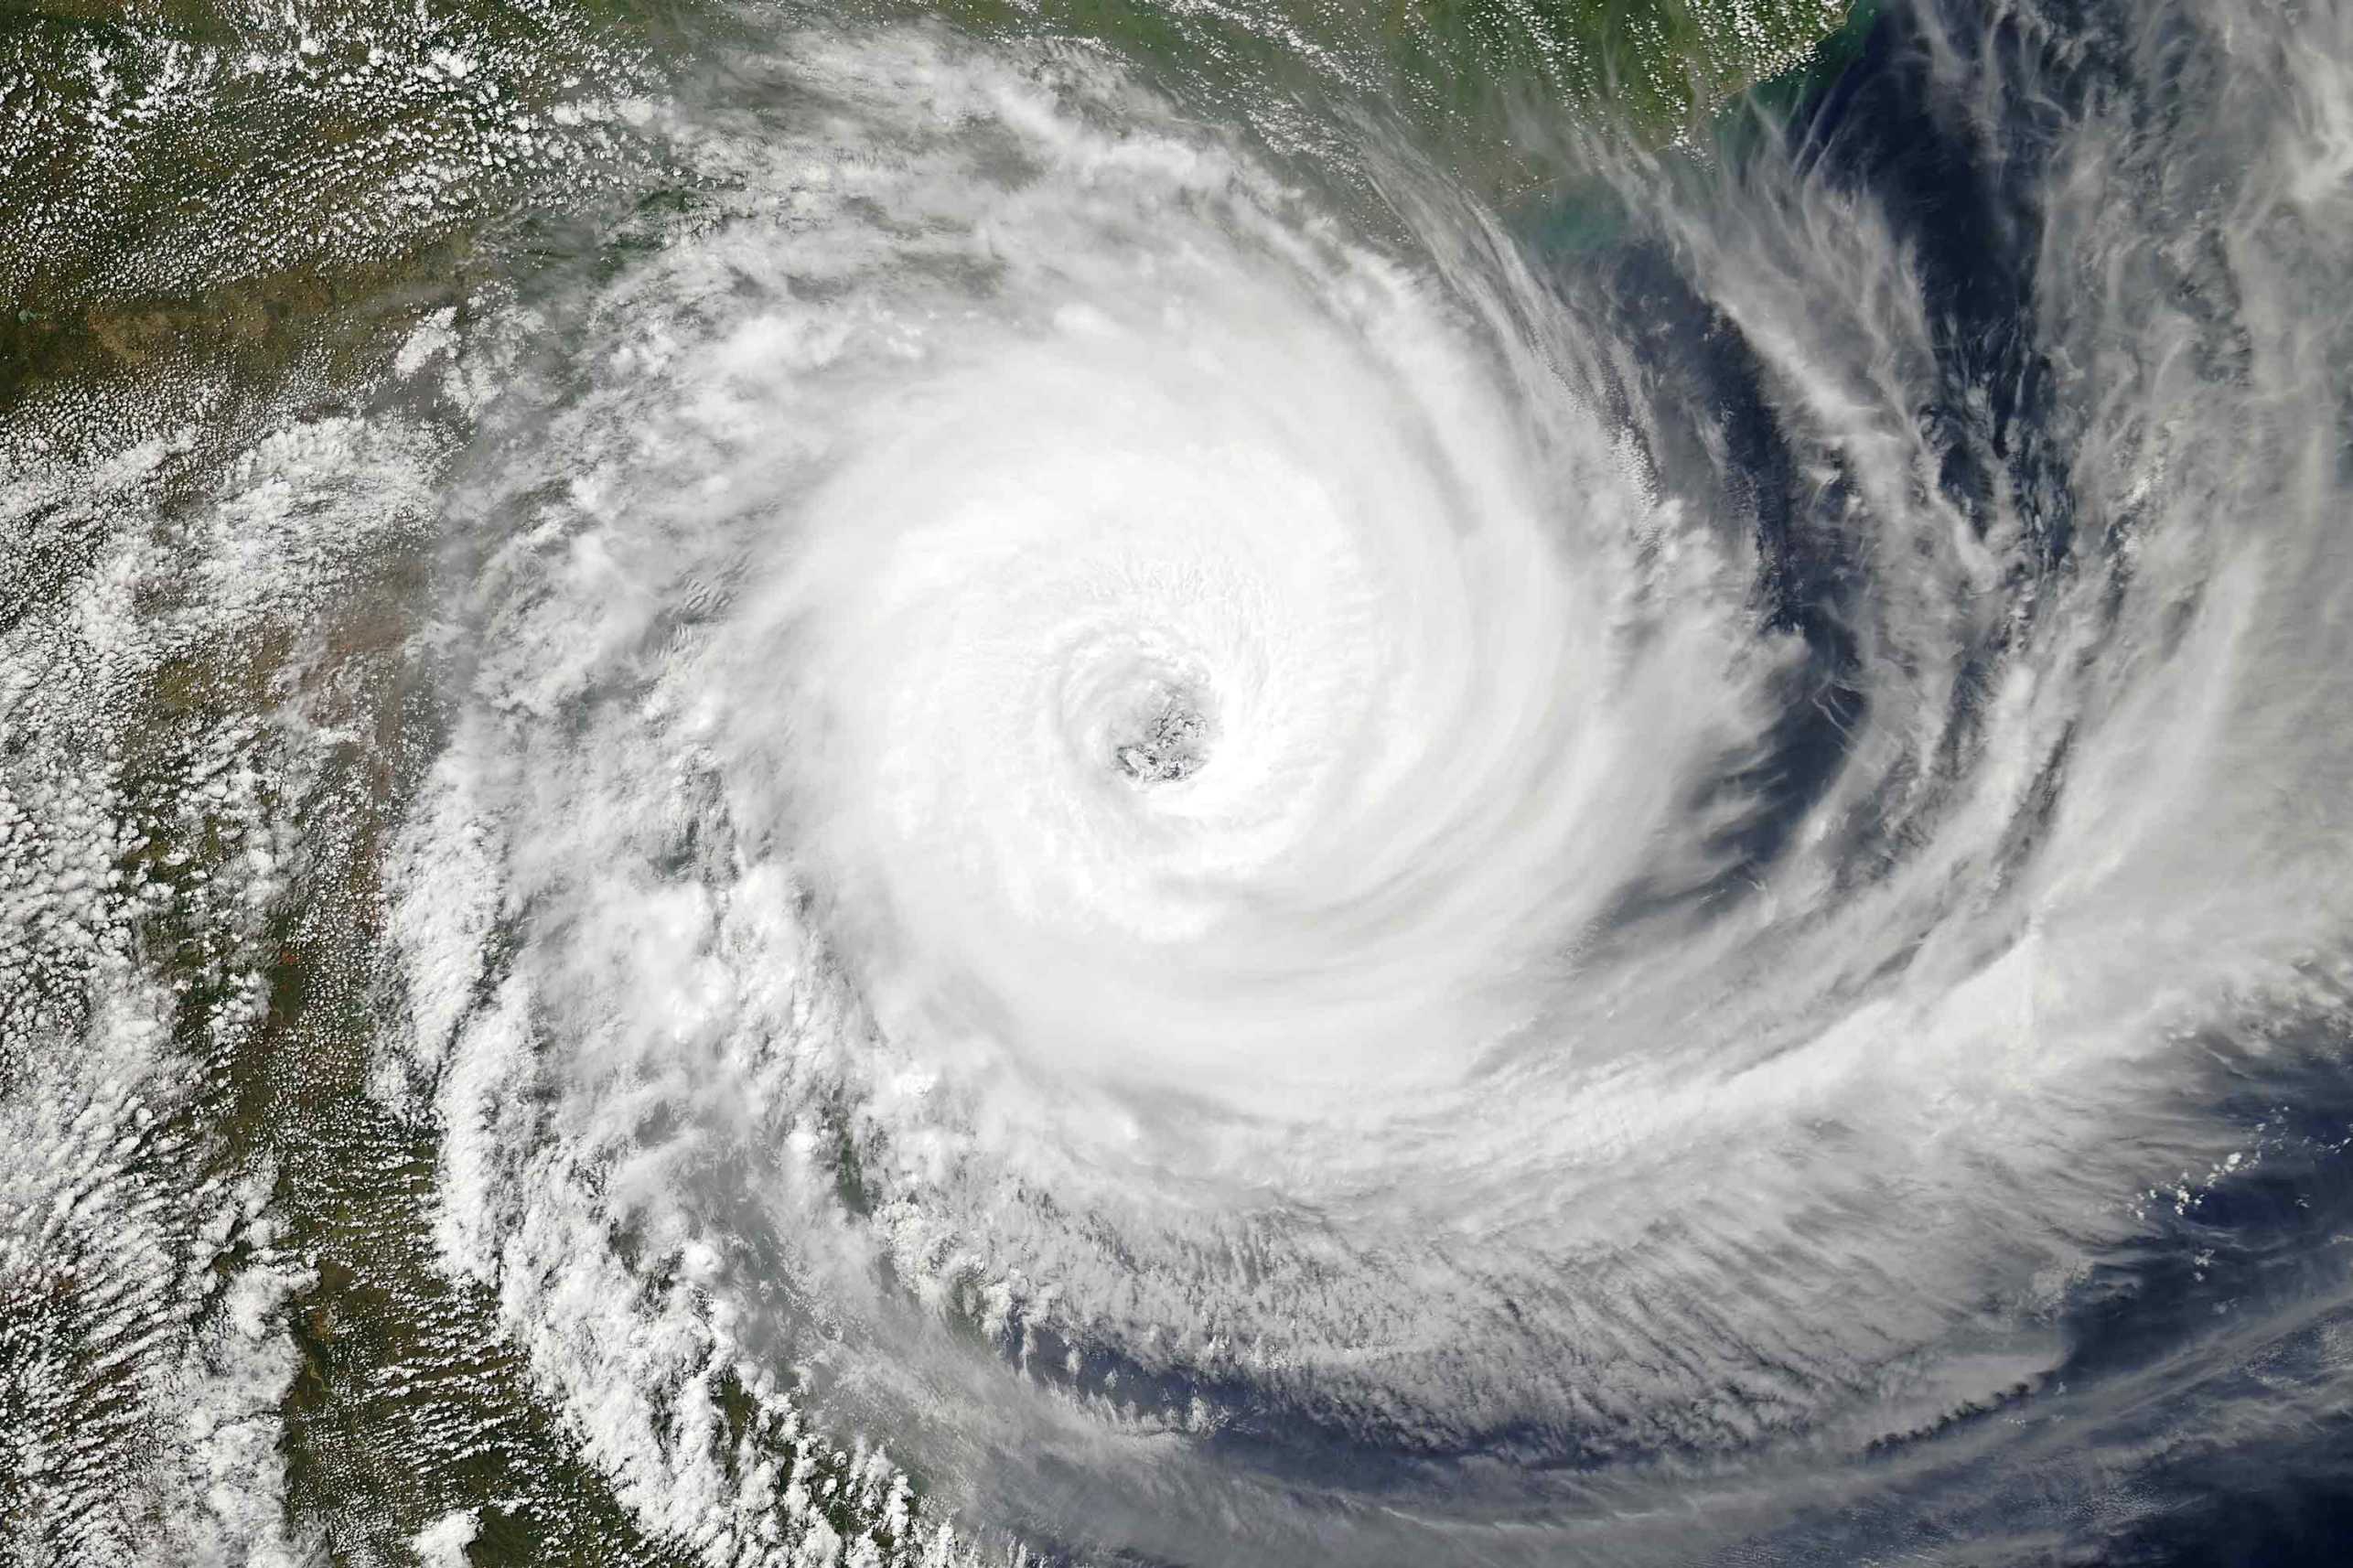 Satellite view of a cyclone